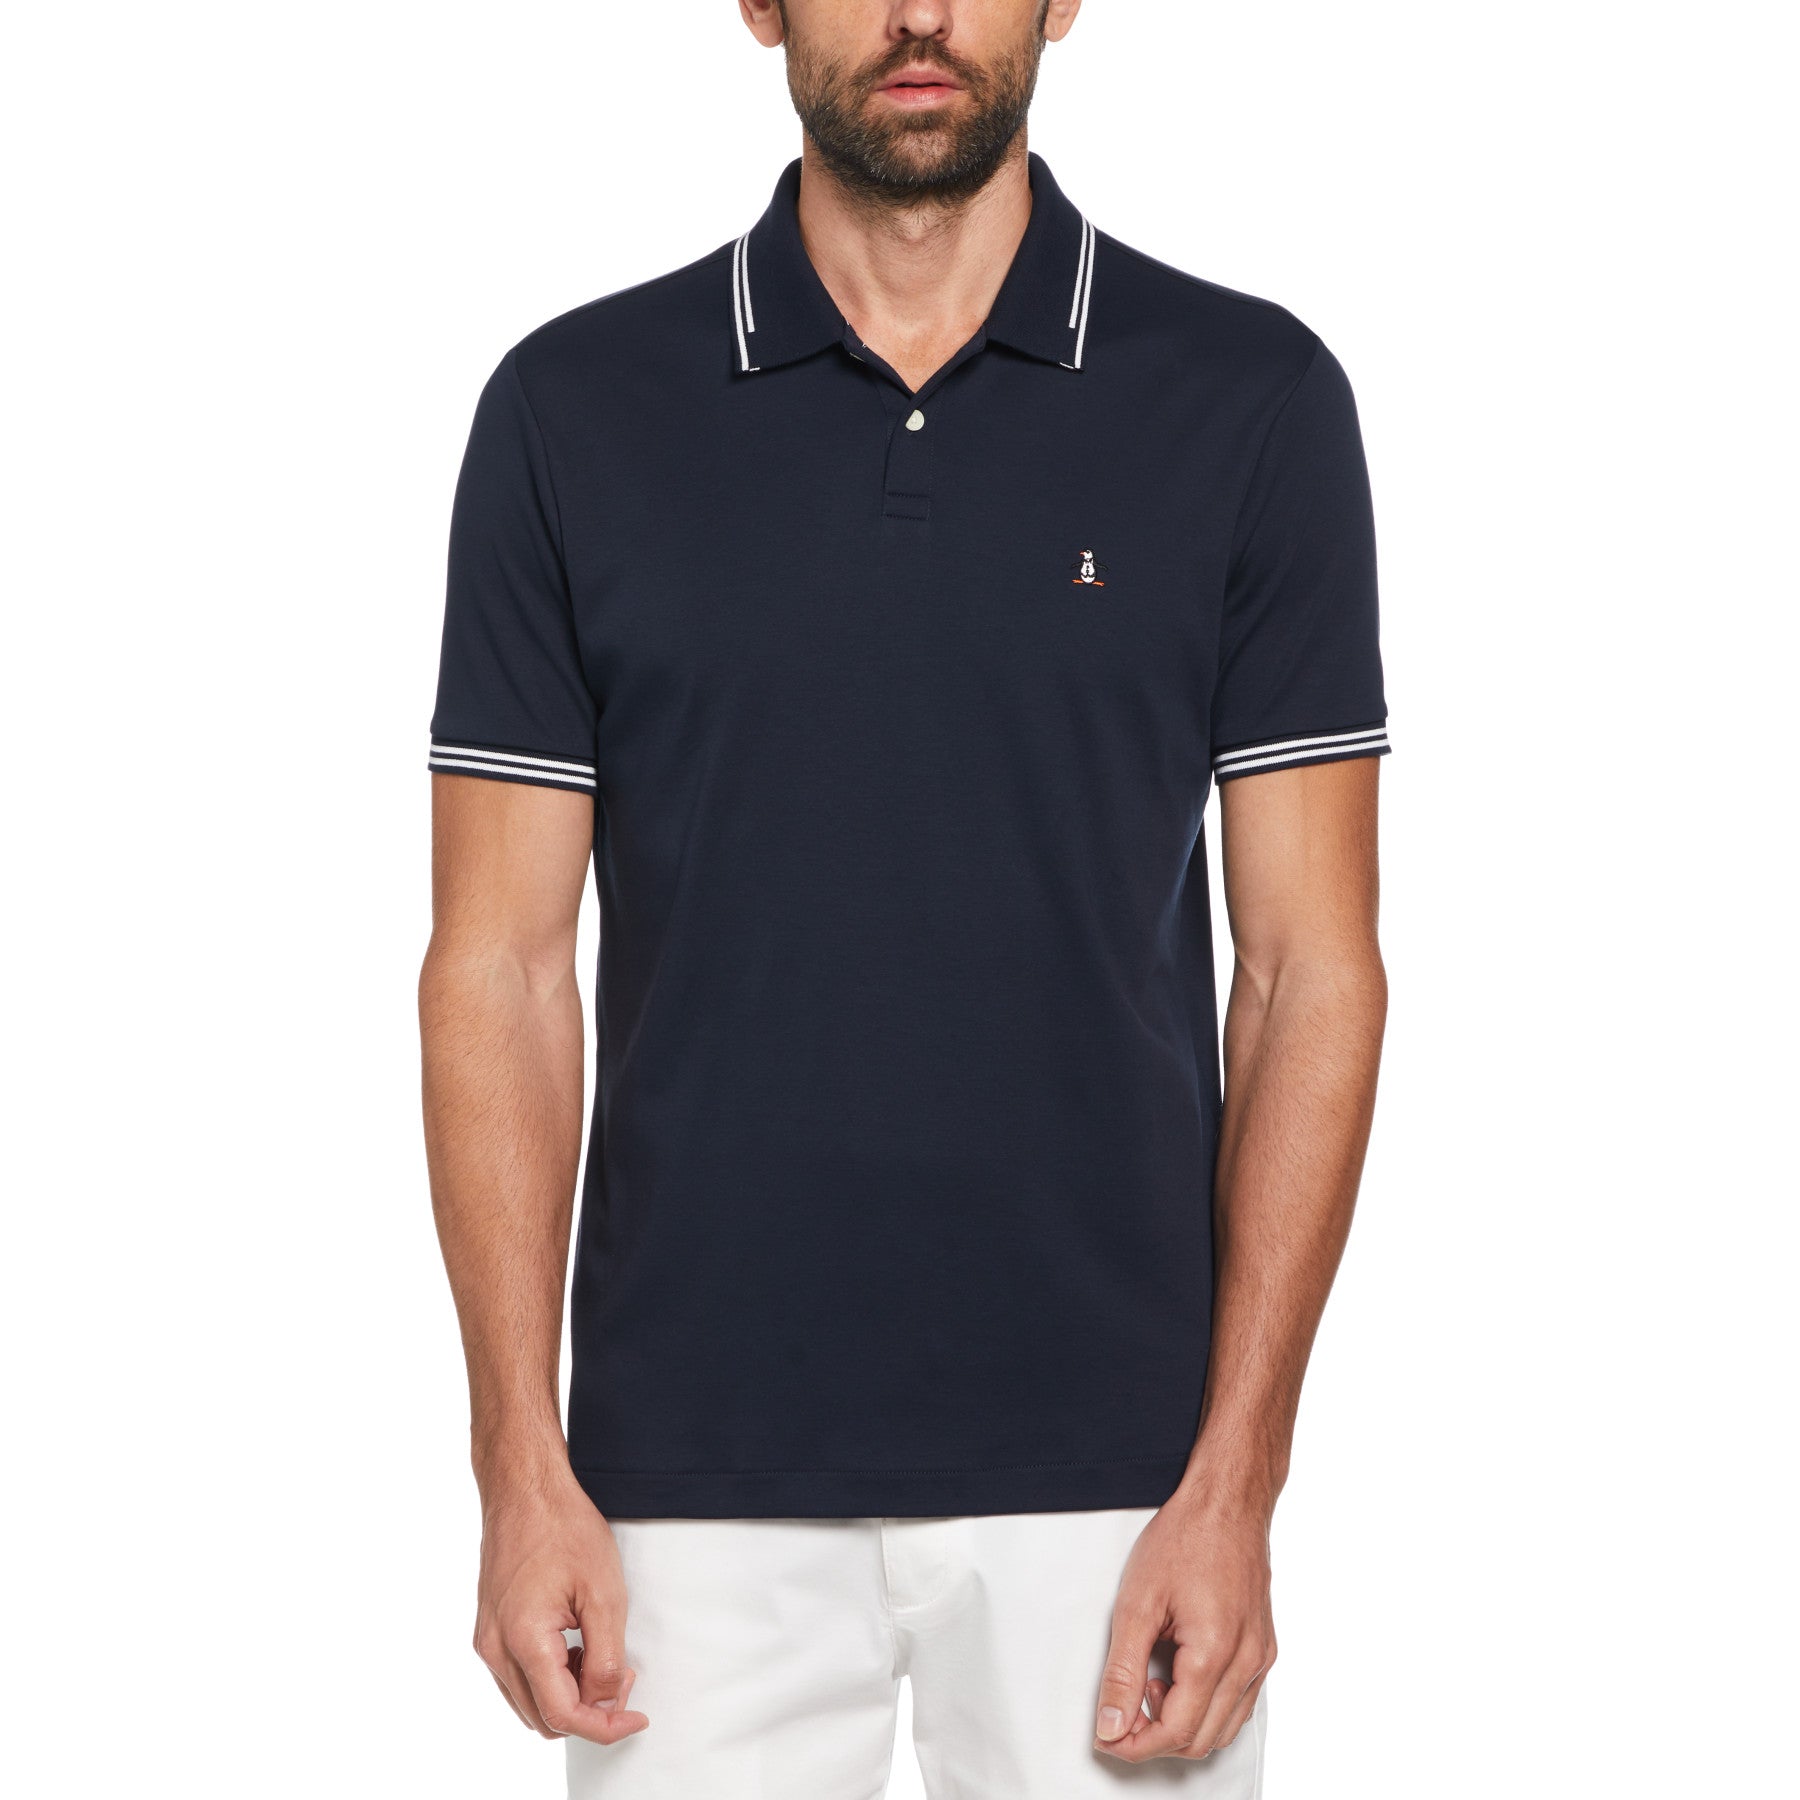 View Icons Organic Cotton Tipped Polo Shirt In Dark Sapphire information